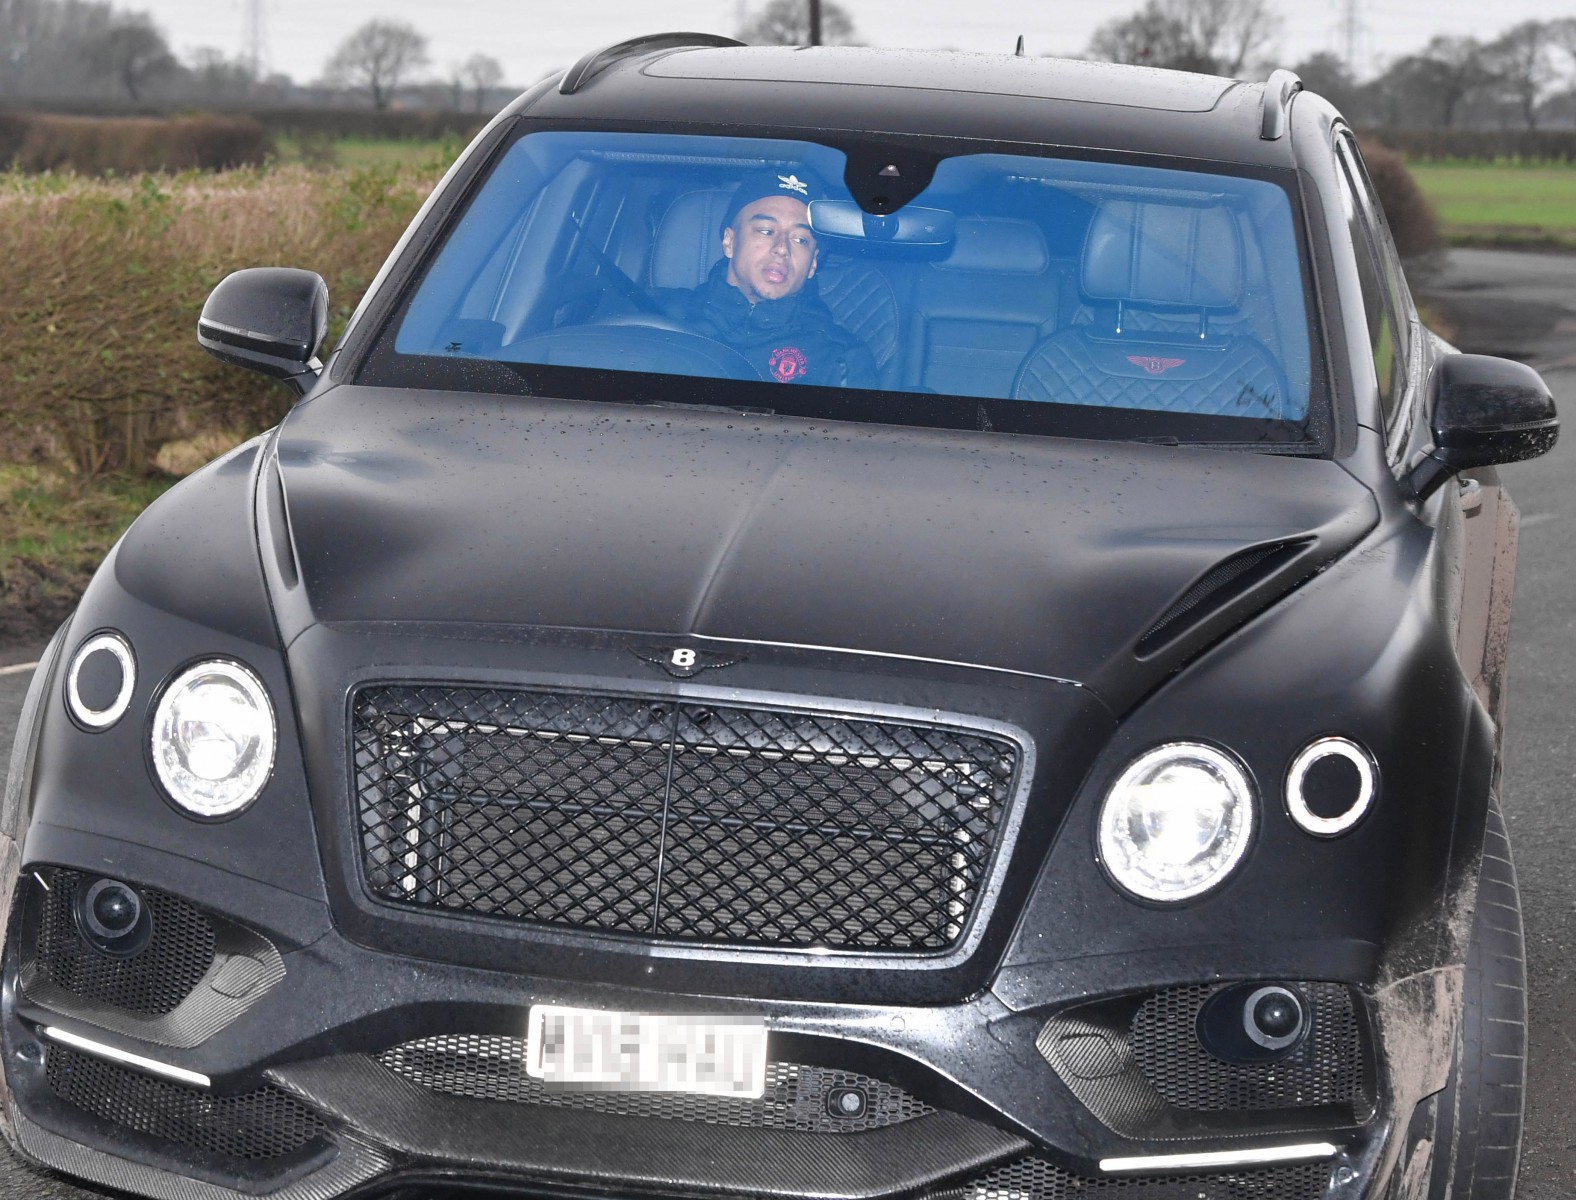 Jesse Lingard in his Bentley driving into training